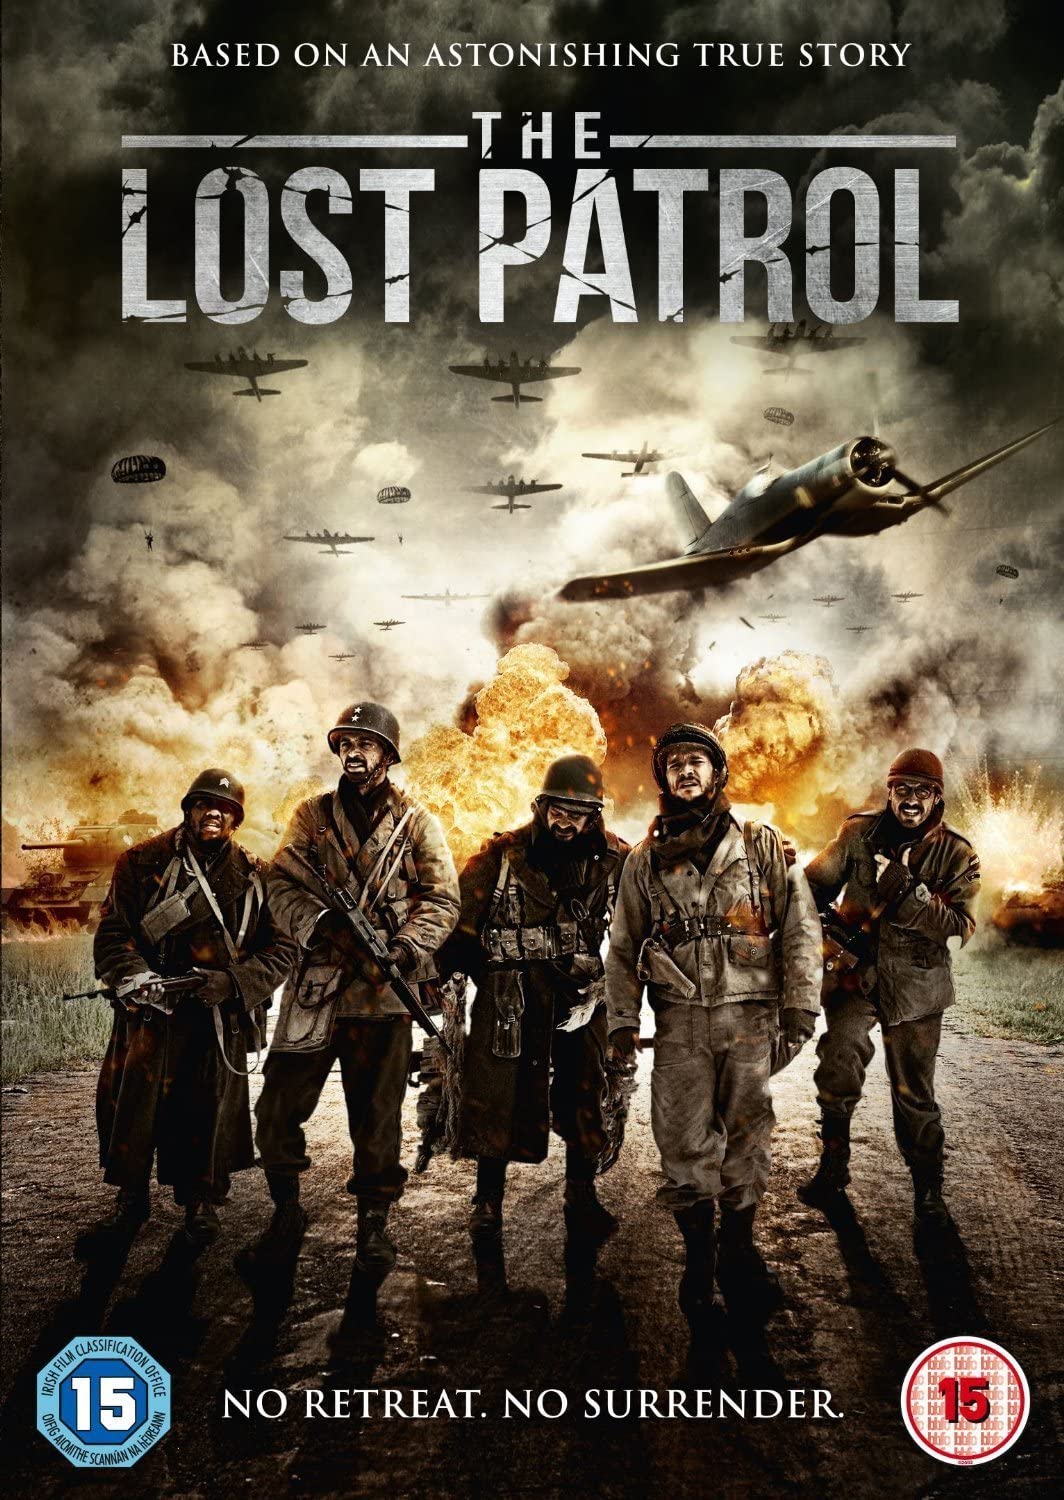 The Lost Patrol - War/Action [DVD]